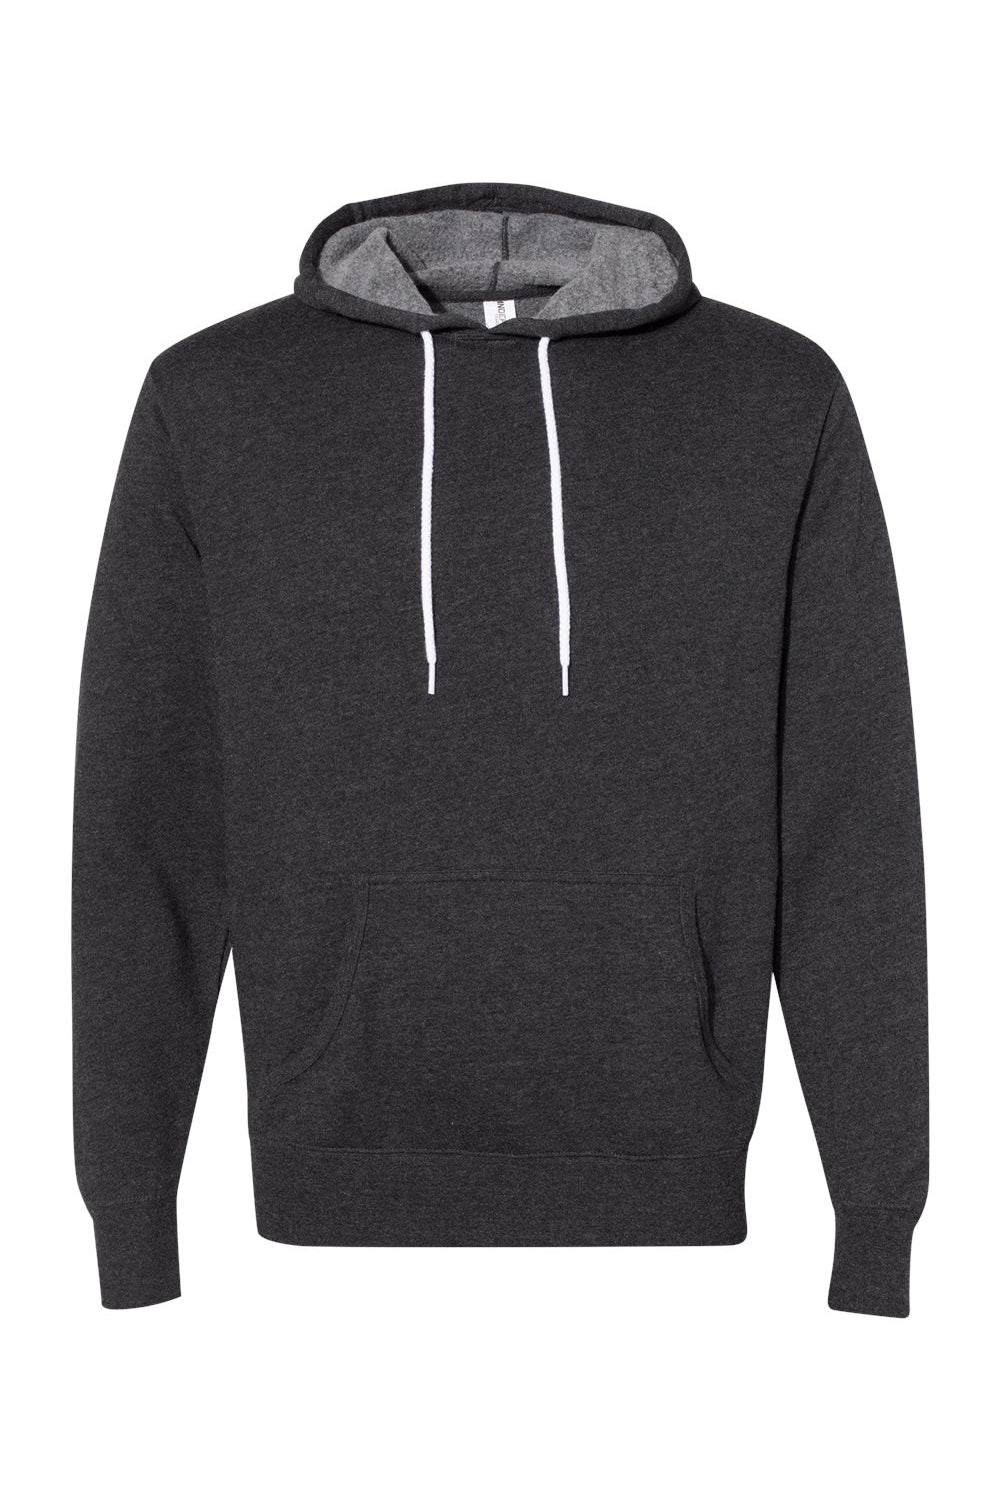 Independent Trading Co. AFX90UN Mens Hooded Sweatshirt Hoodie Heather Charcoal Grey Flat Front